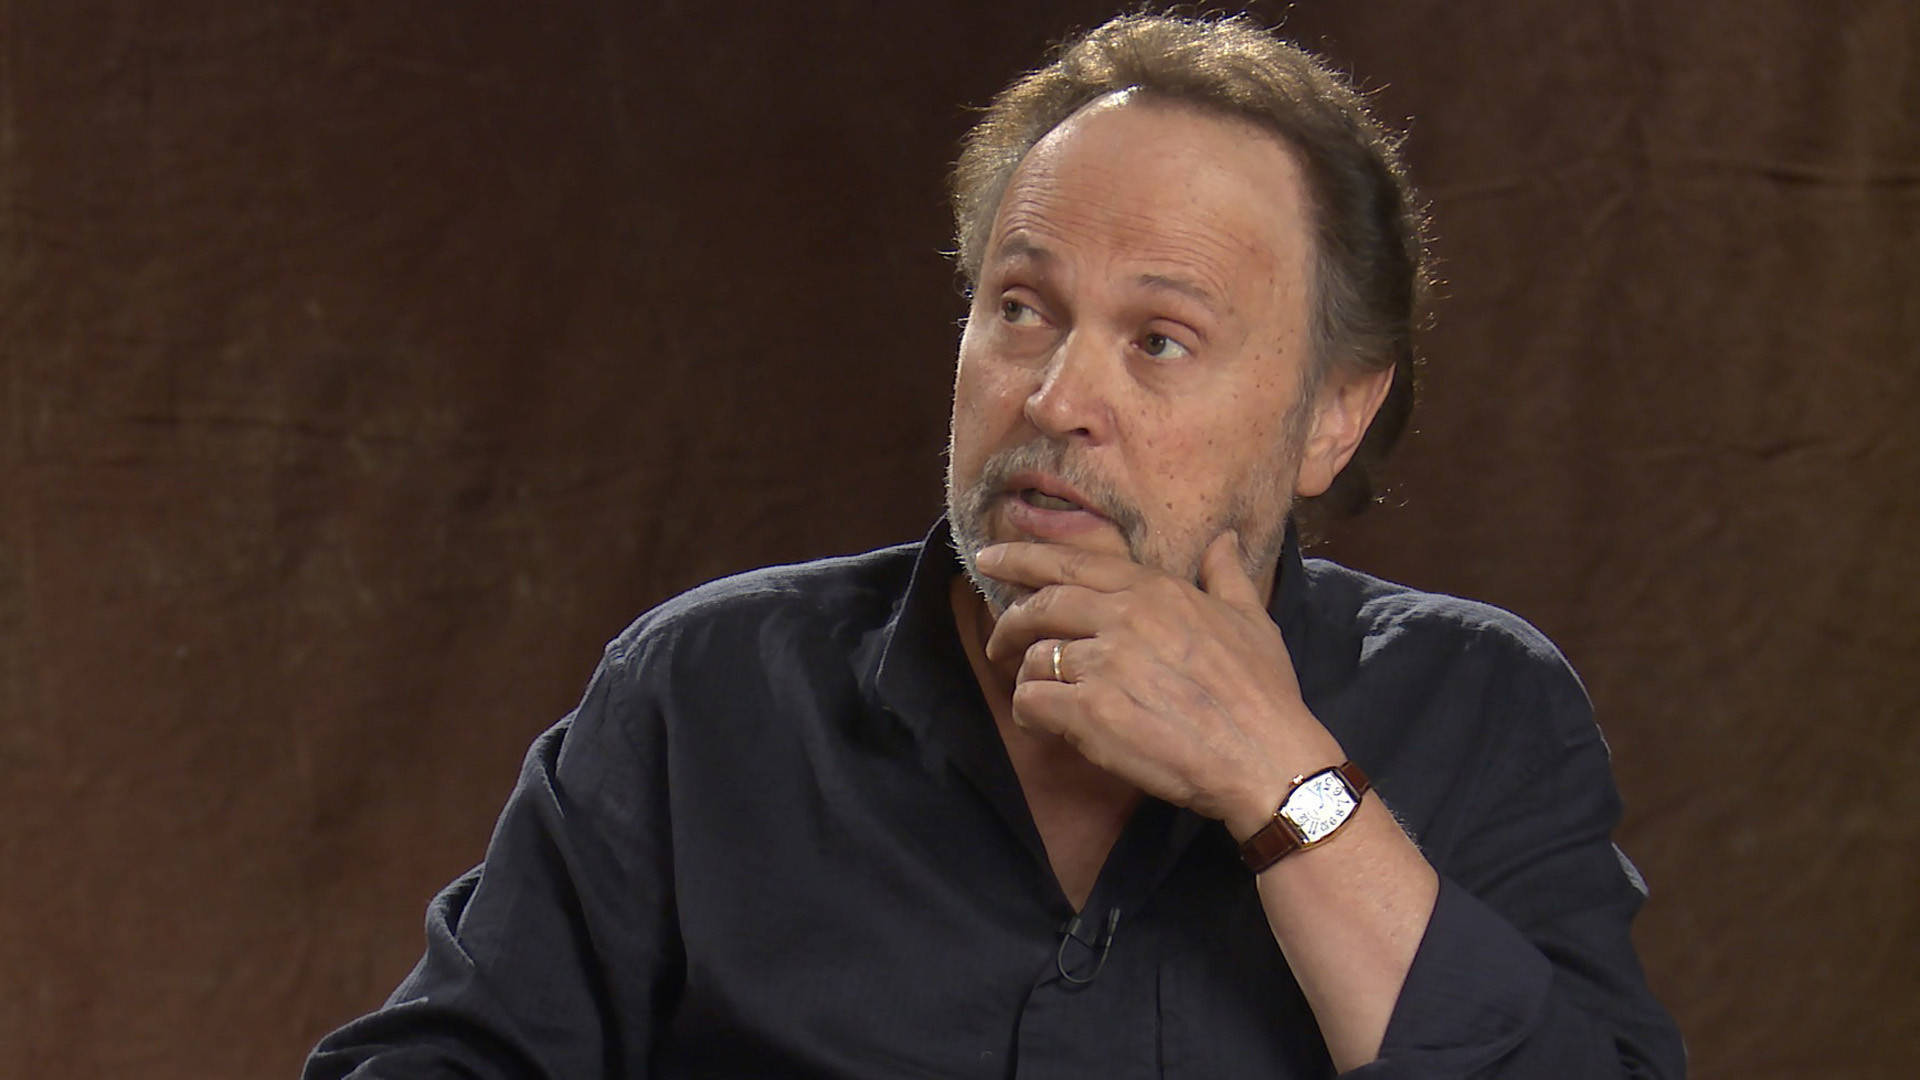 "Billy Crystal, the Renowned American Actor, Engaging in an Interview" Wallpaper